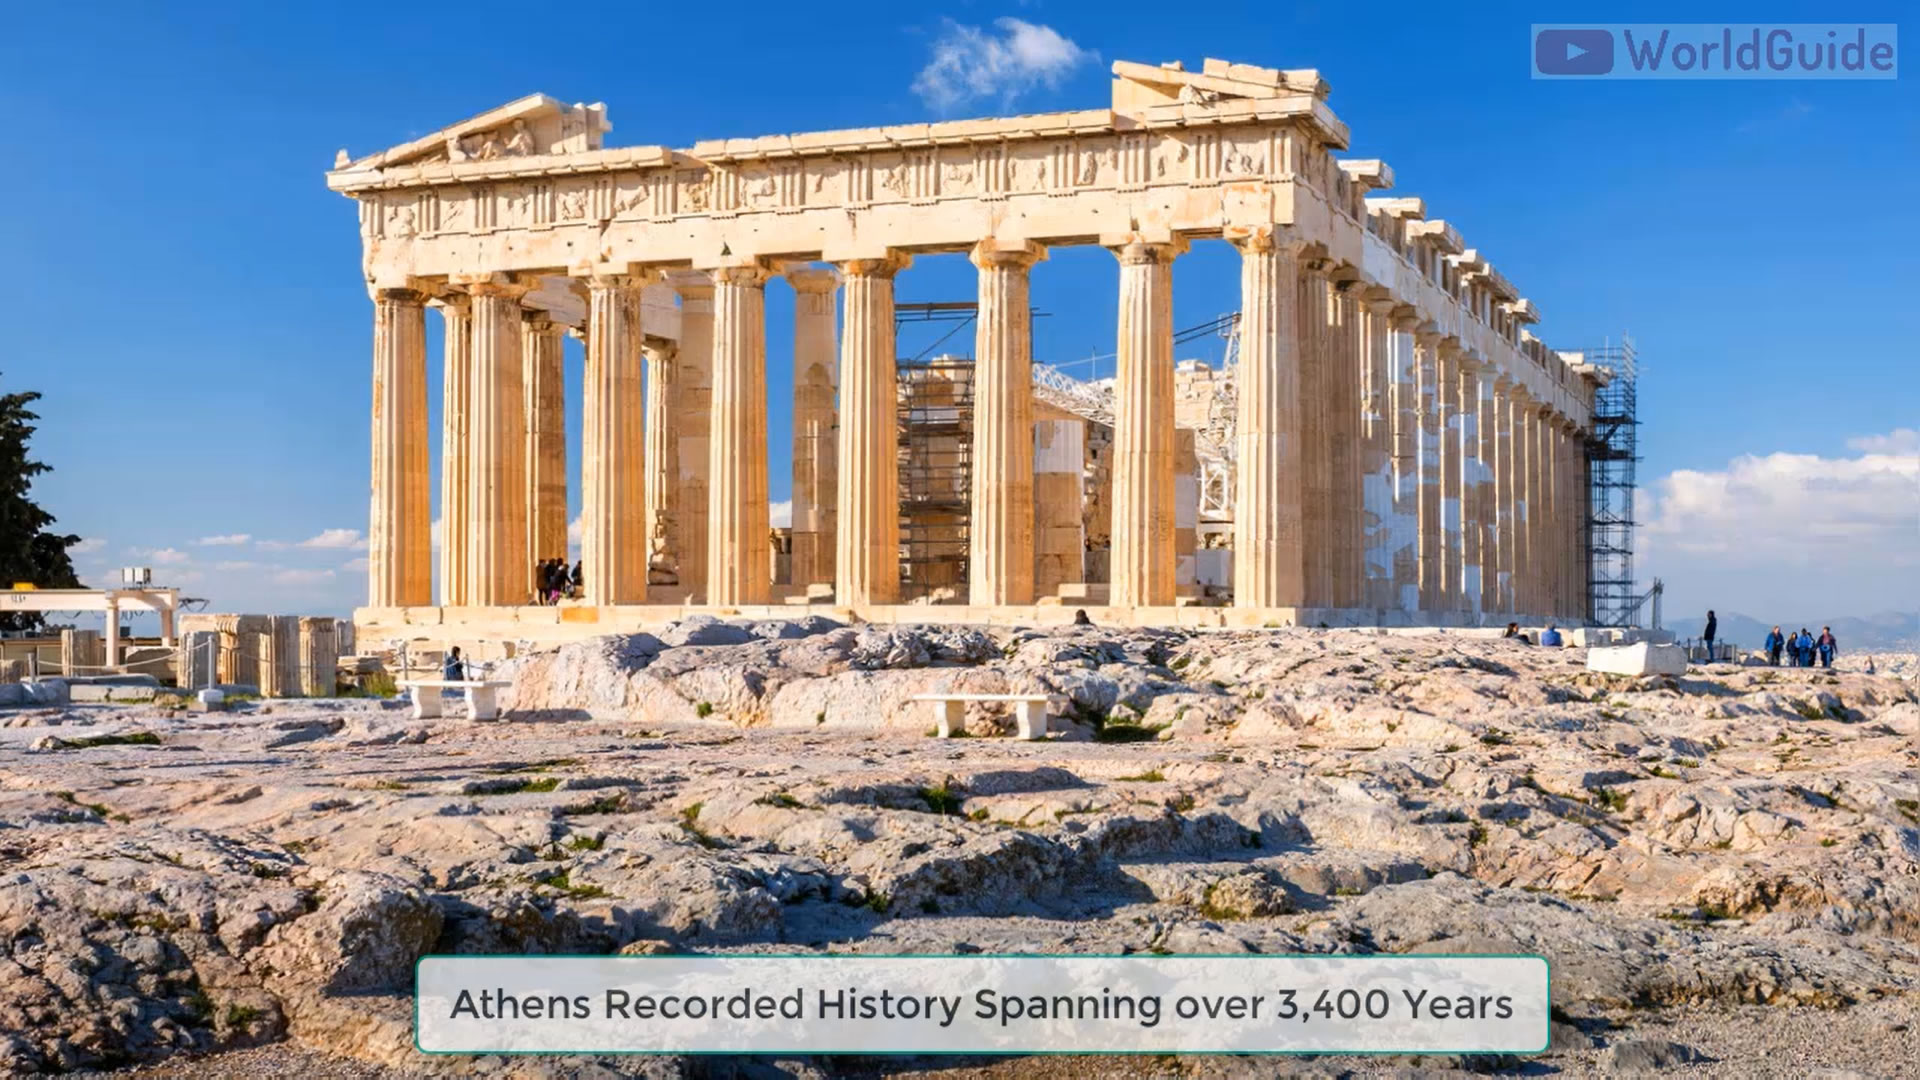 Athens Recorded History Spanning over 3,400 Years